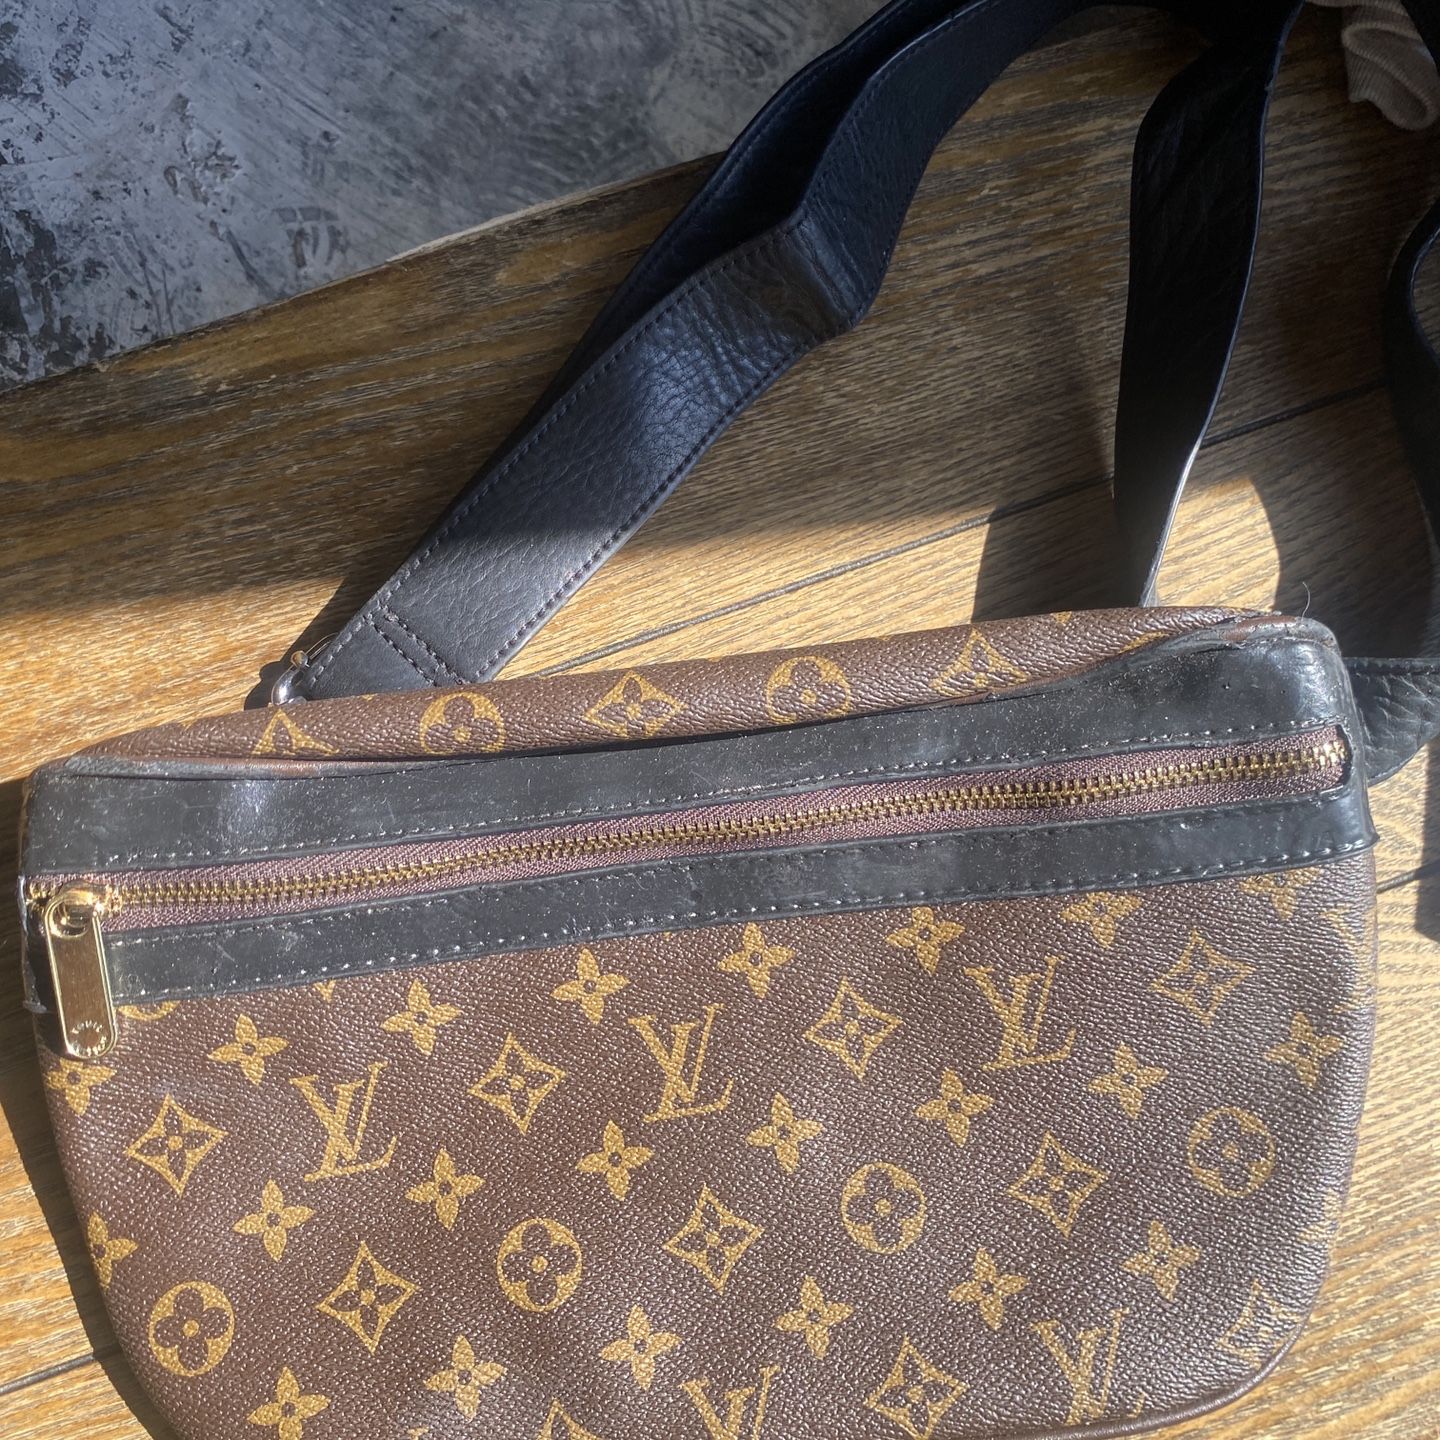 Louis VUITTON FANNY PACK for Sale in Pasadena, CA - OfferUp